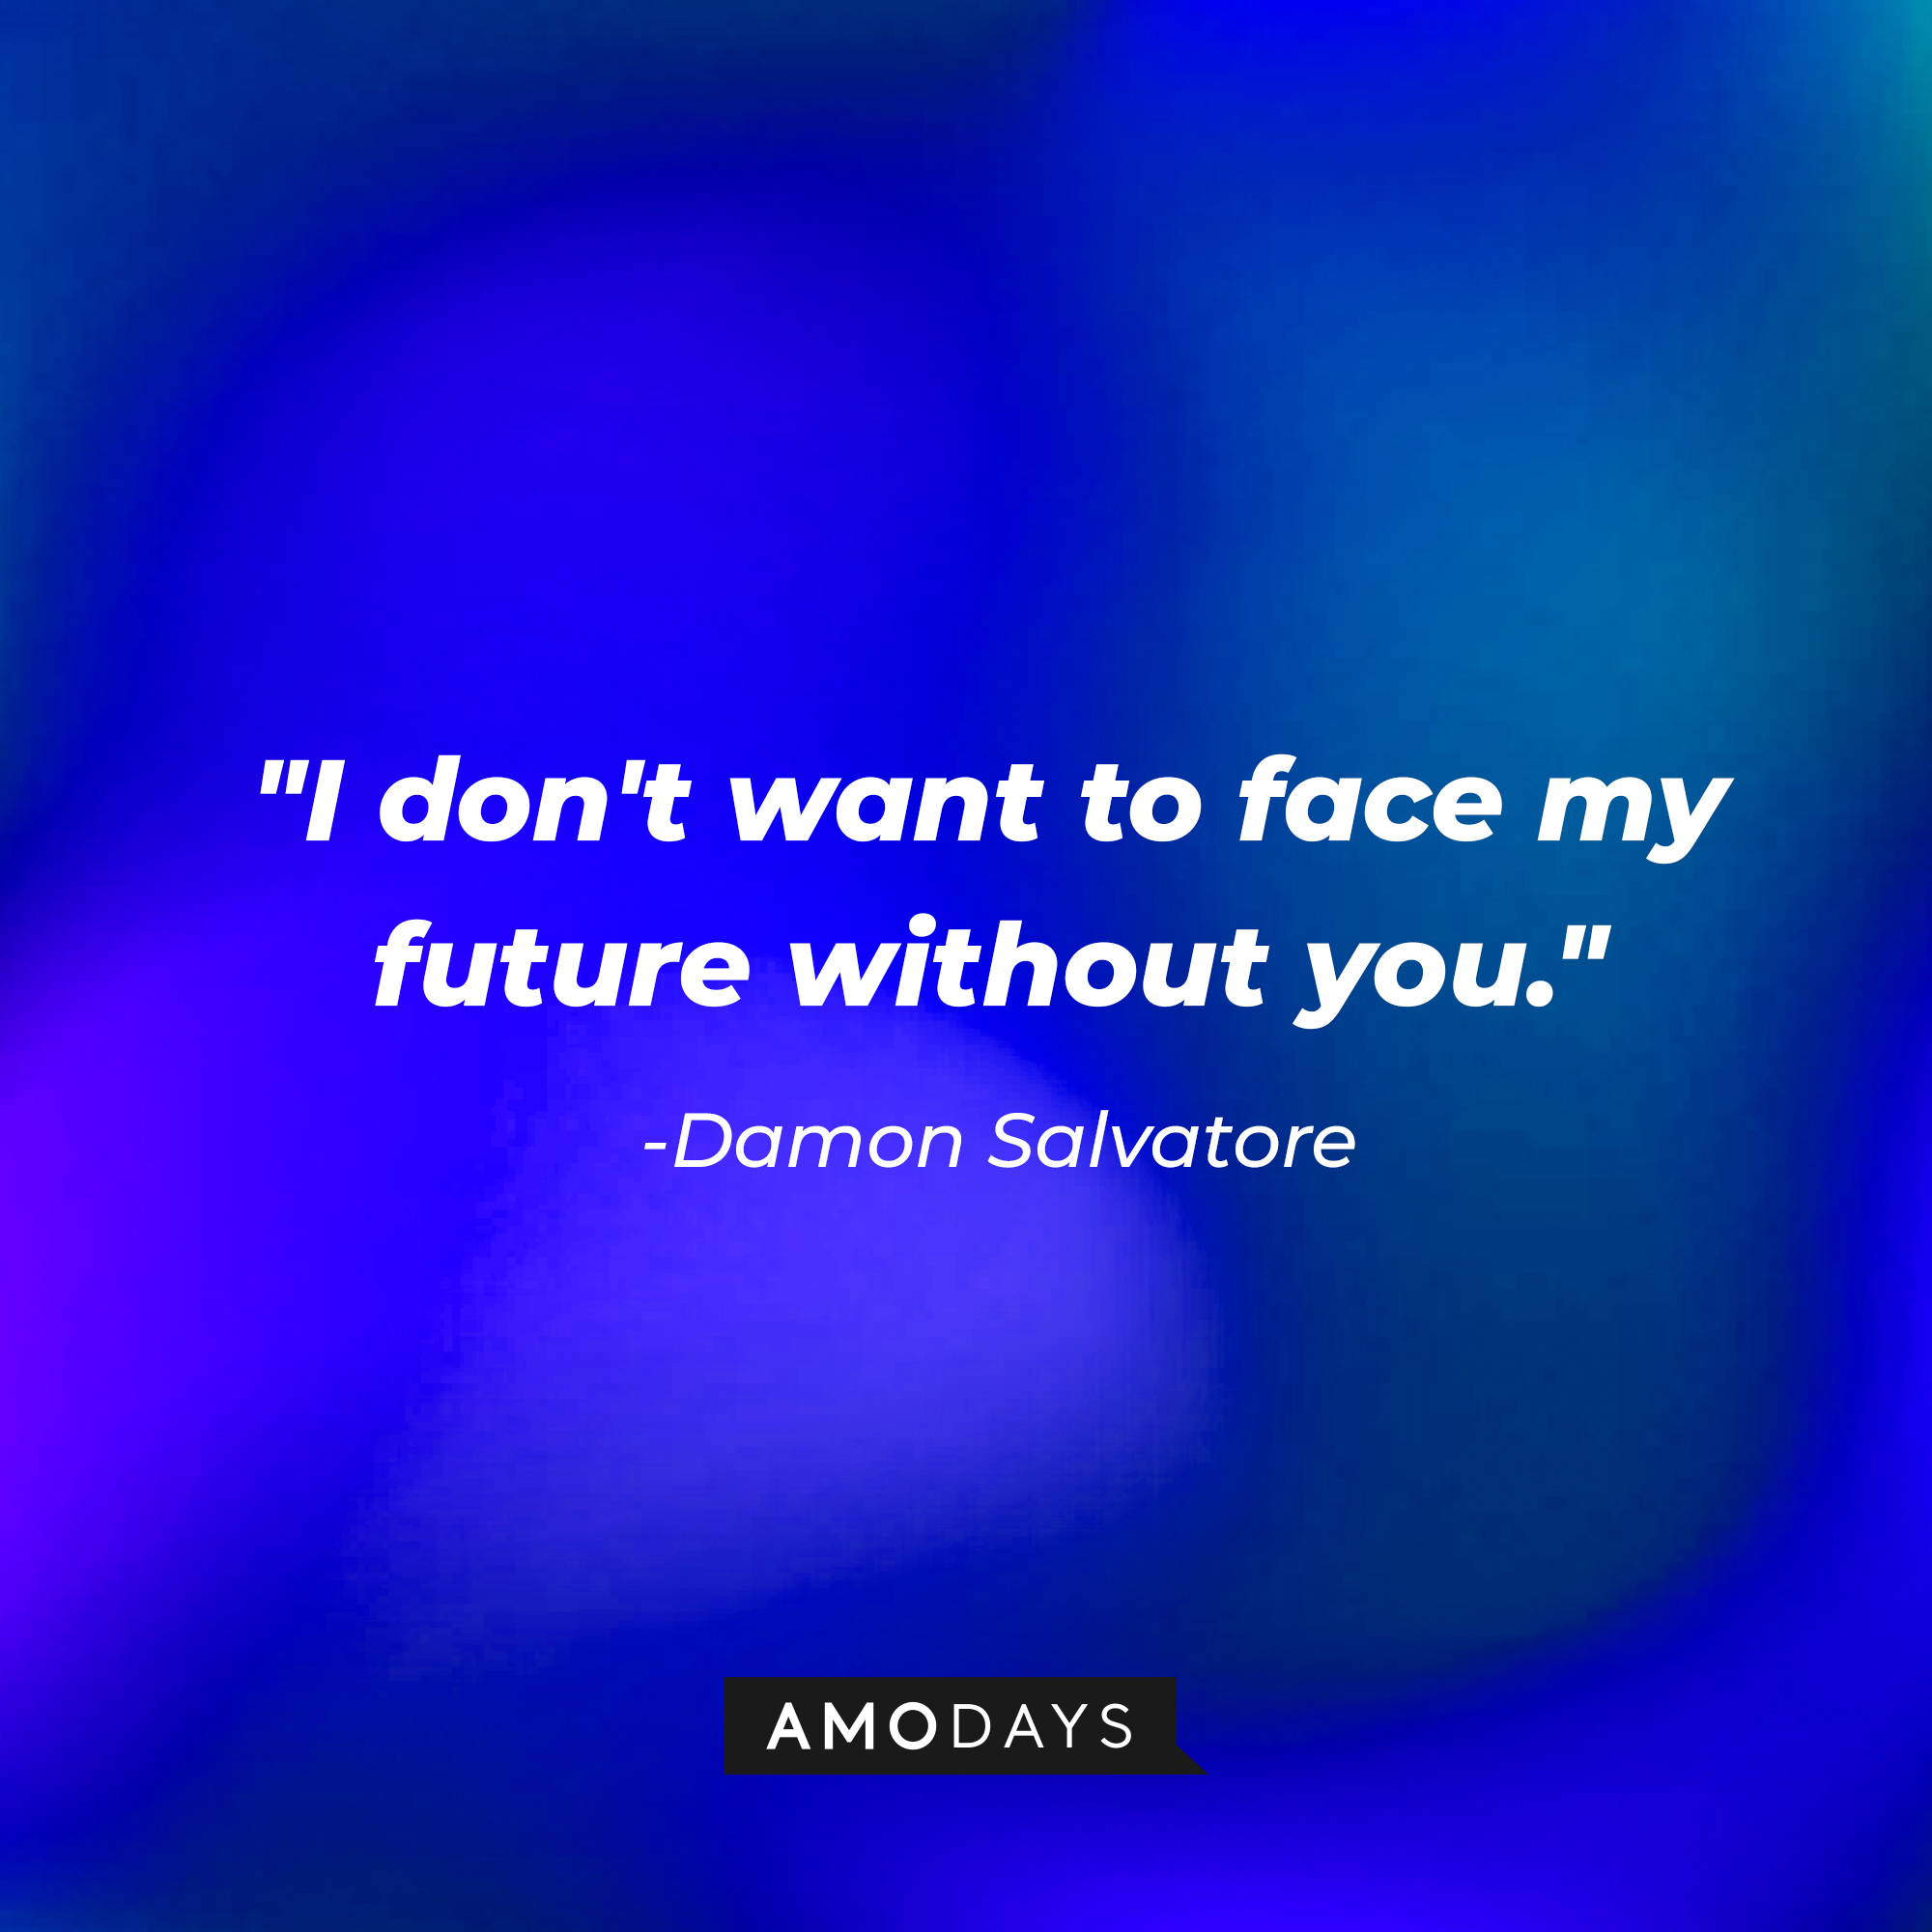 Damon Salvatore's quote: "I don't want to face my future without you." | Source: AmoDays